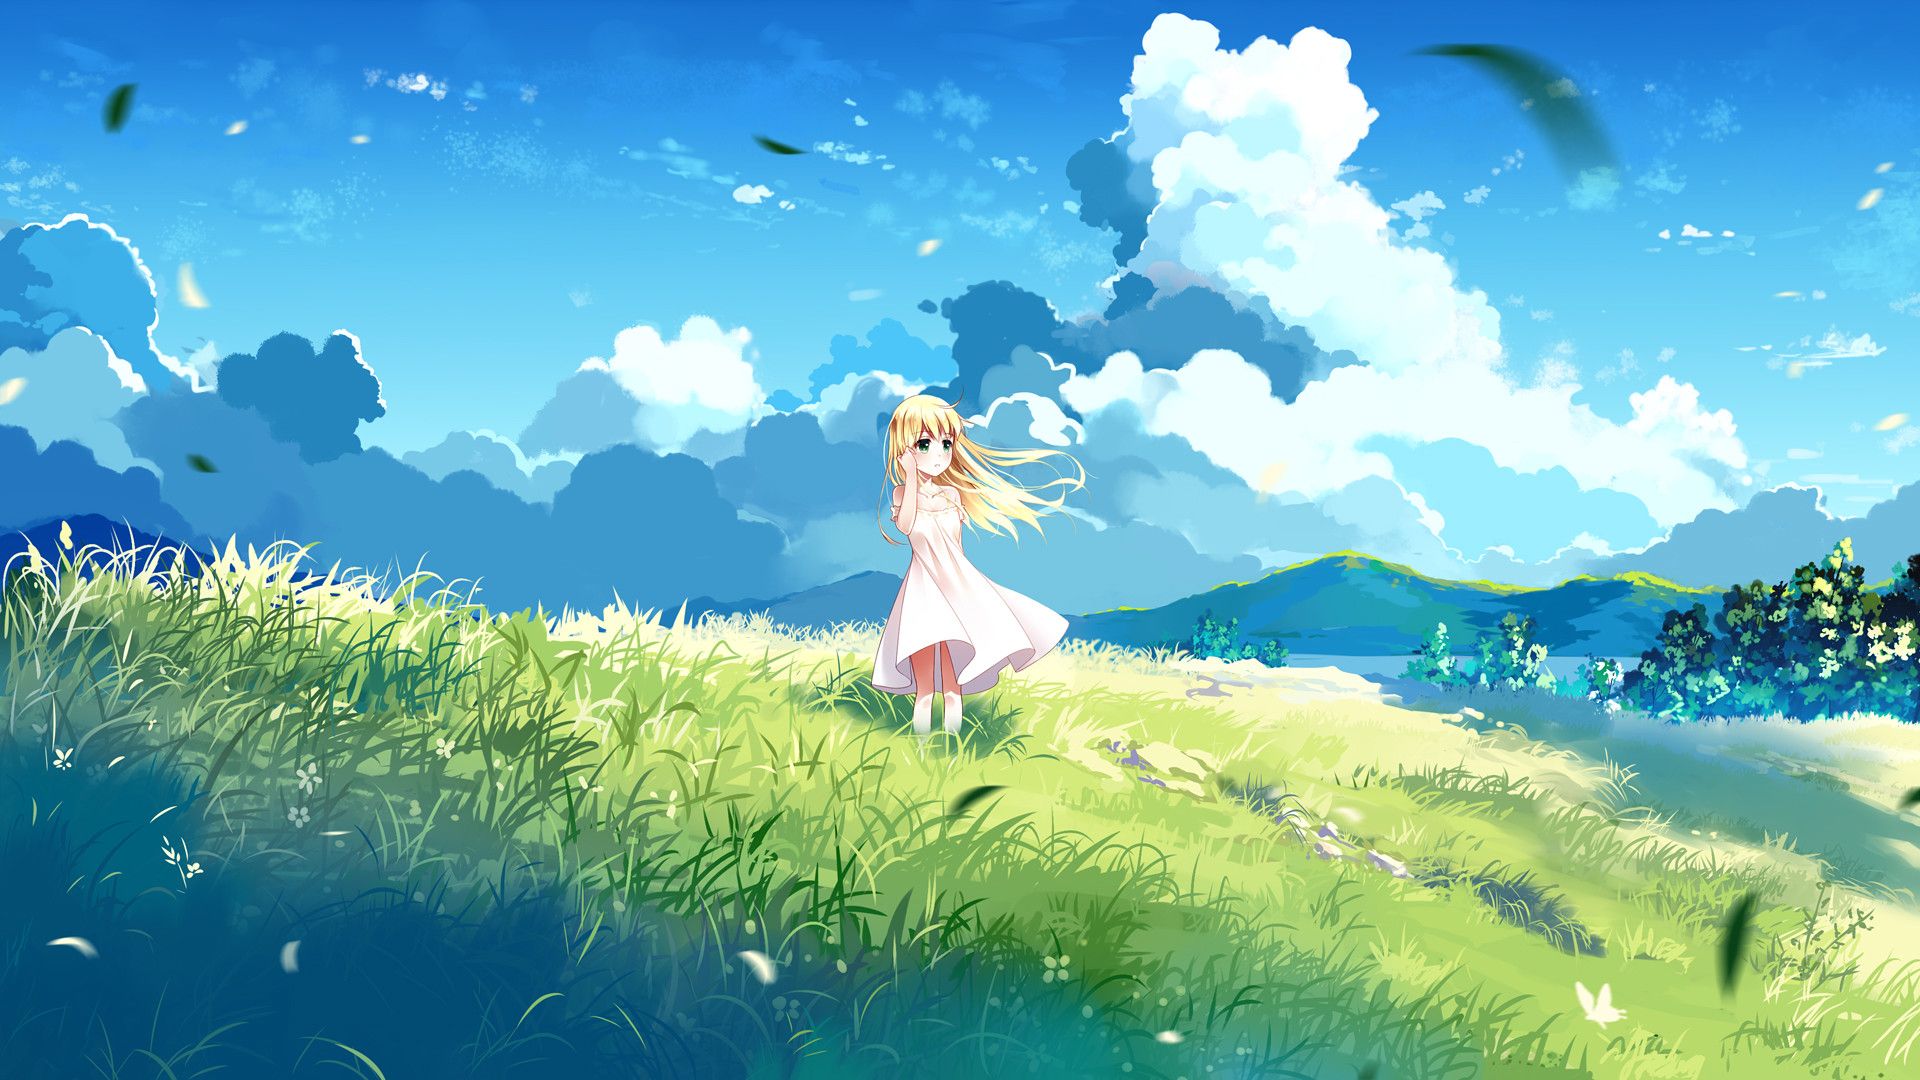 Desktop Wallpapers Landscape, Blonde Anime Girl, Clouds, Outdoor, Cute, Hd Image, Picture, Background, 868489